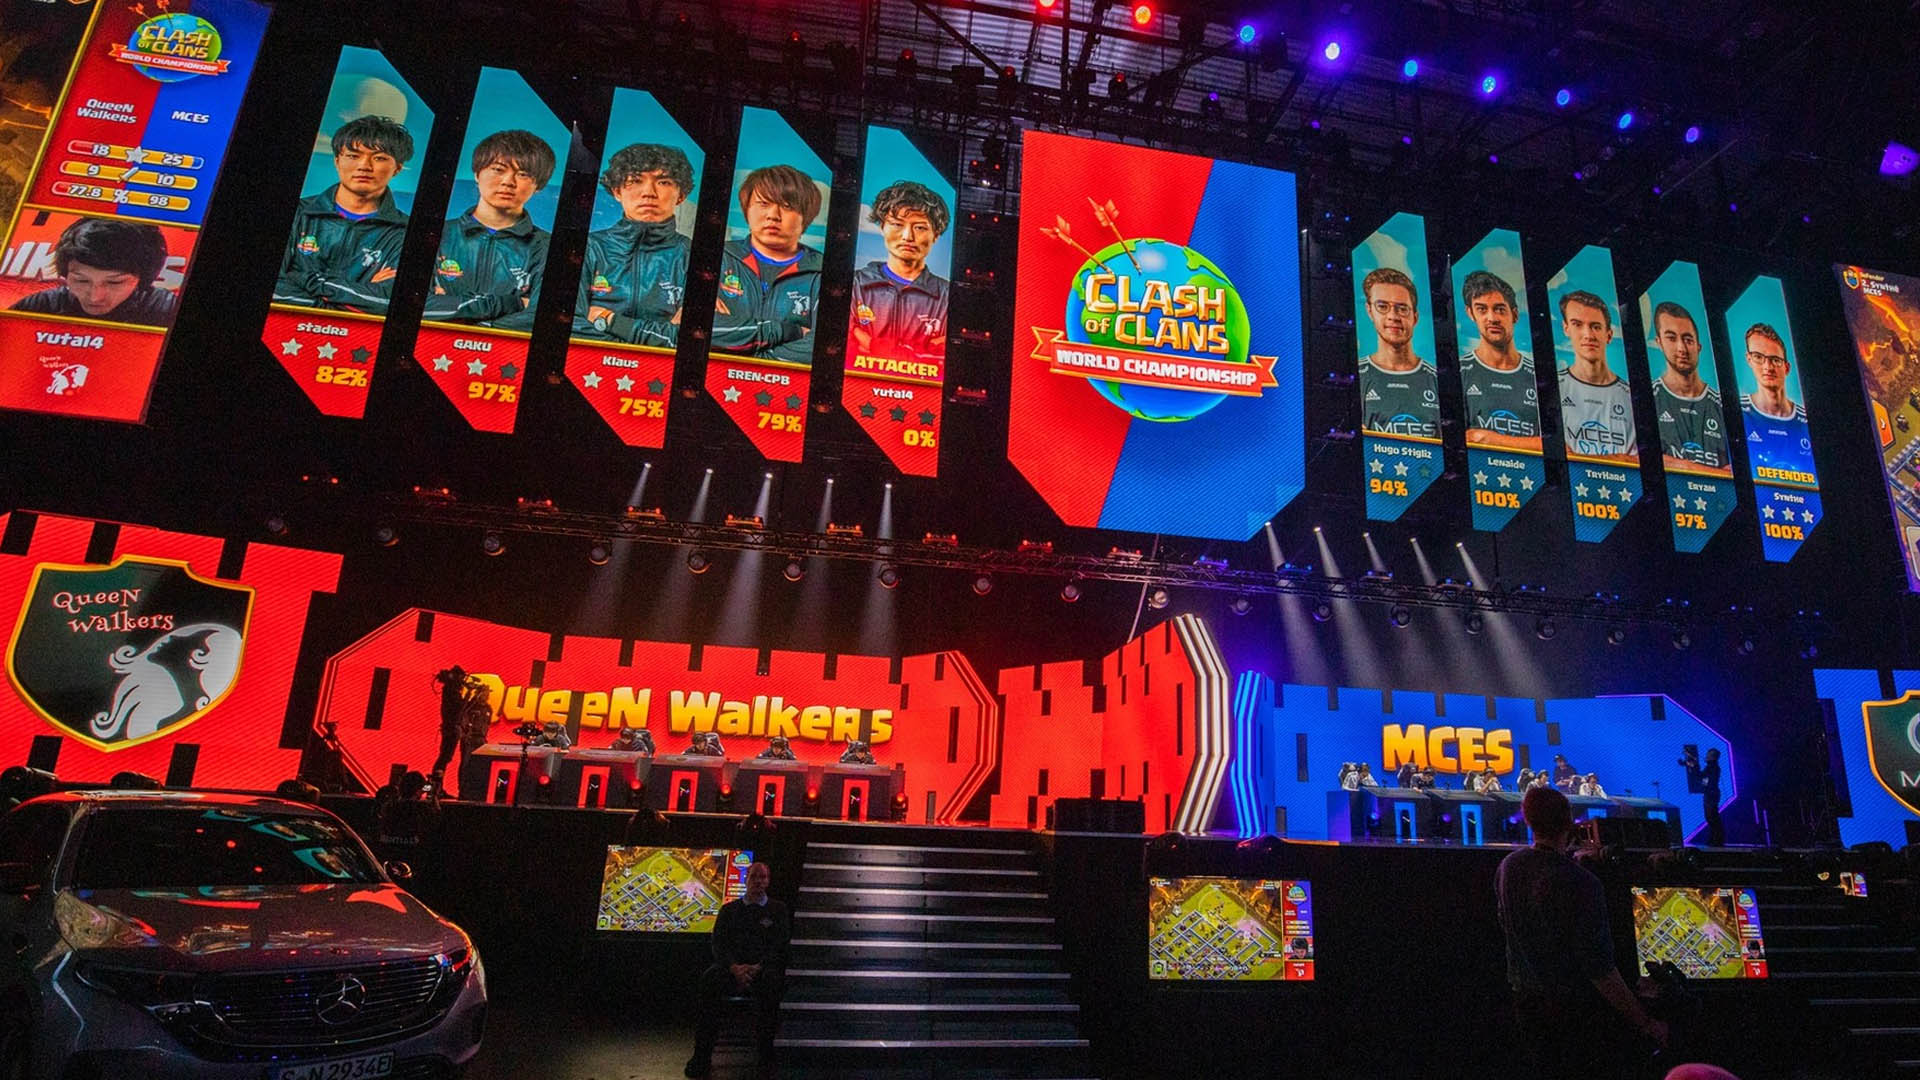 Clash of Clans World Championship 2022 Schedule, teams, prize pool